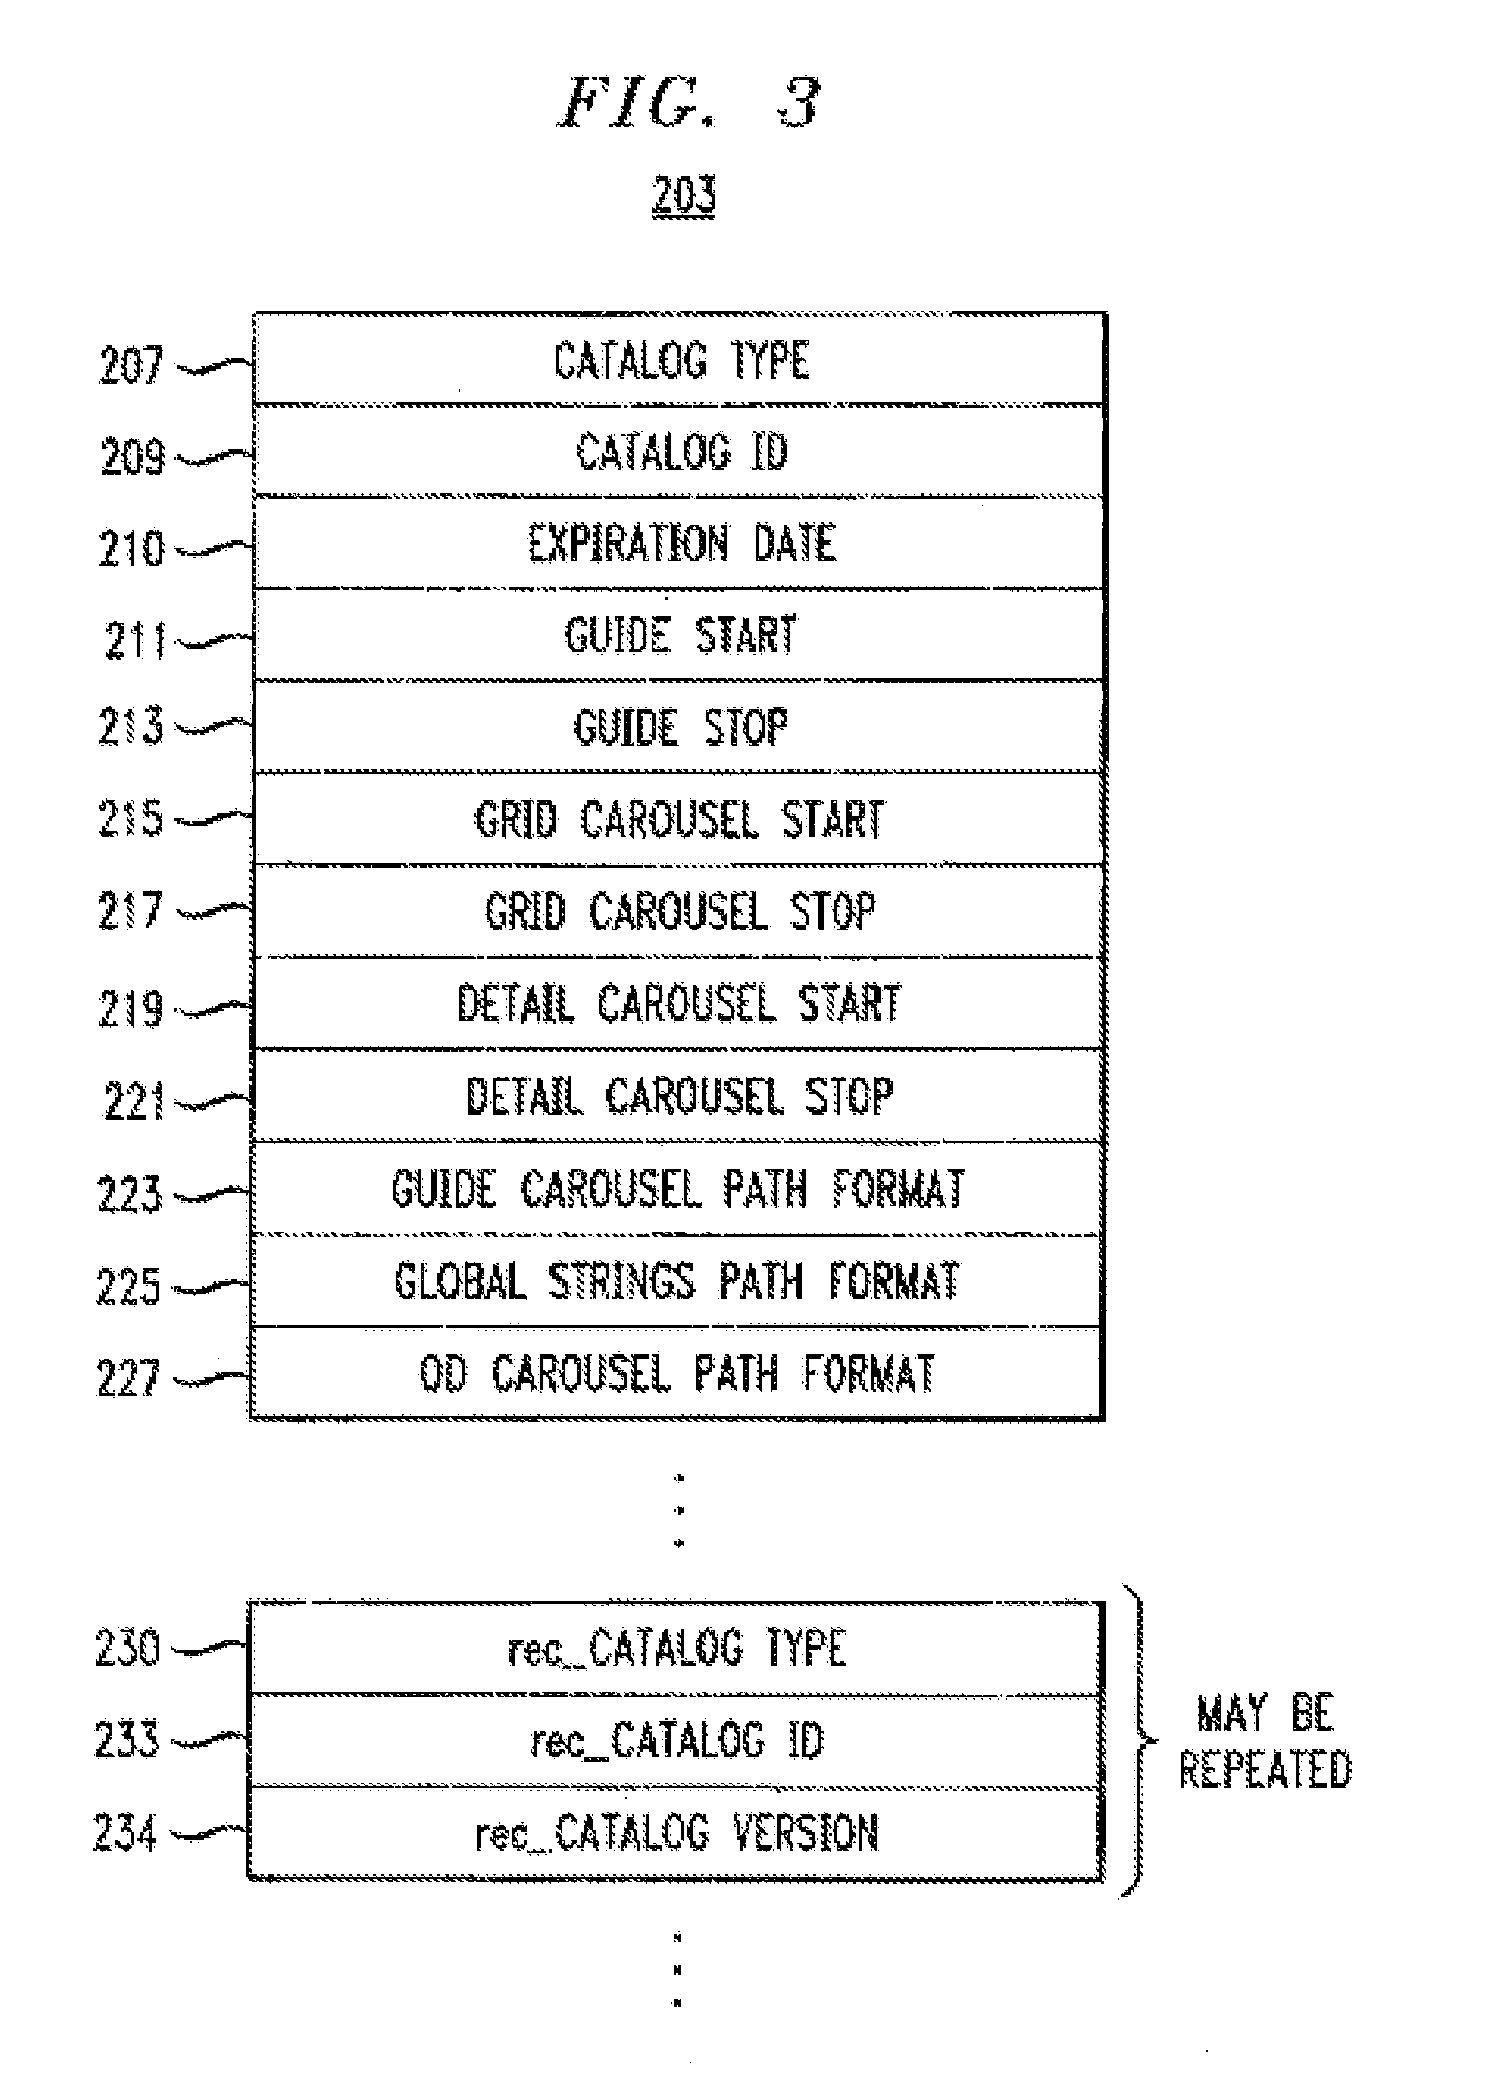 Technique for providing program guide data through a communications network delivering programming content